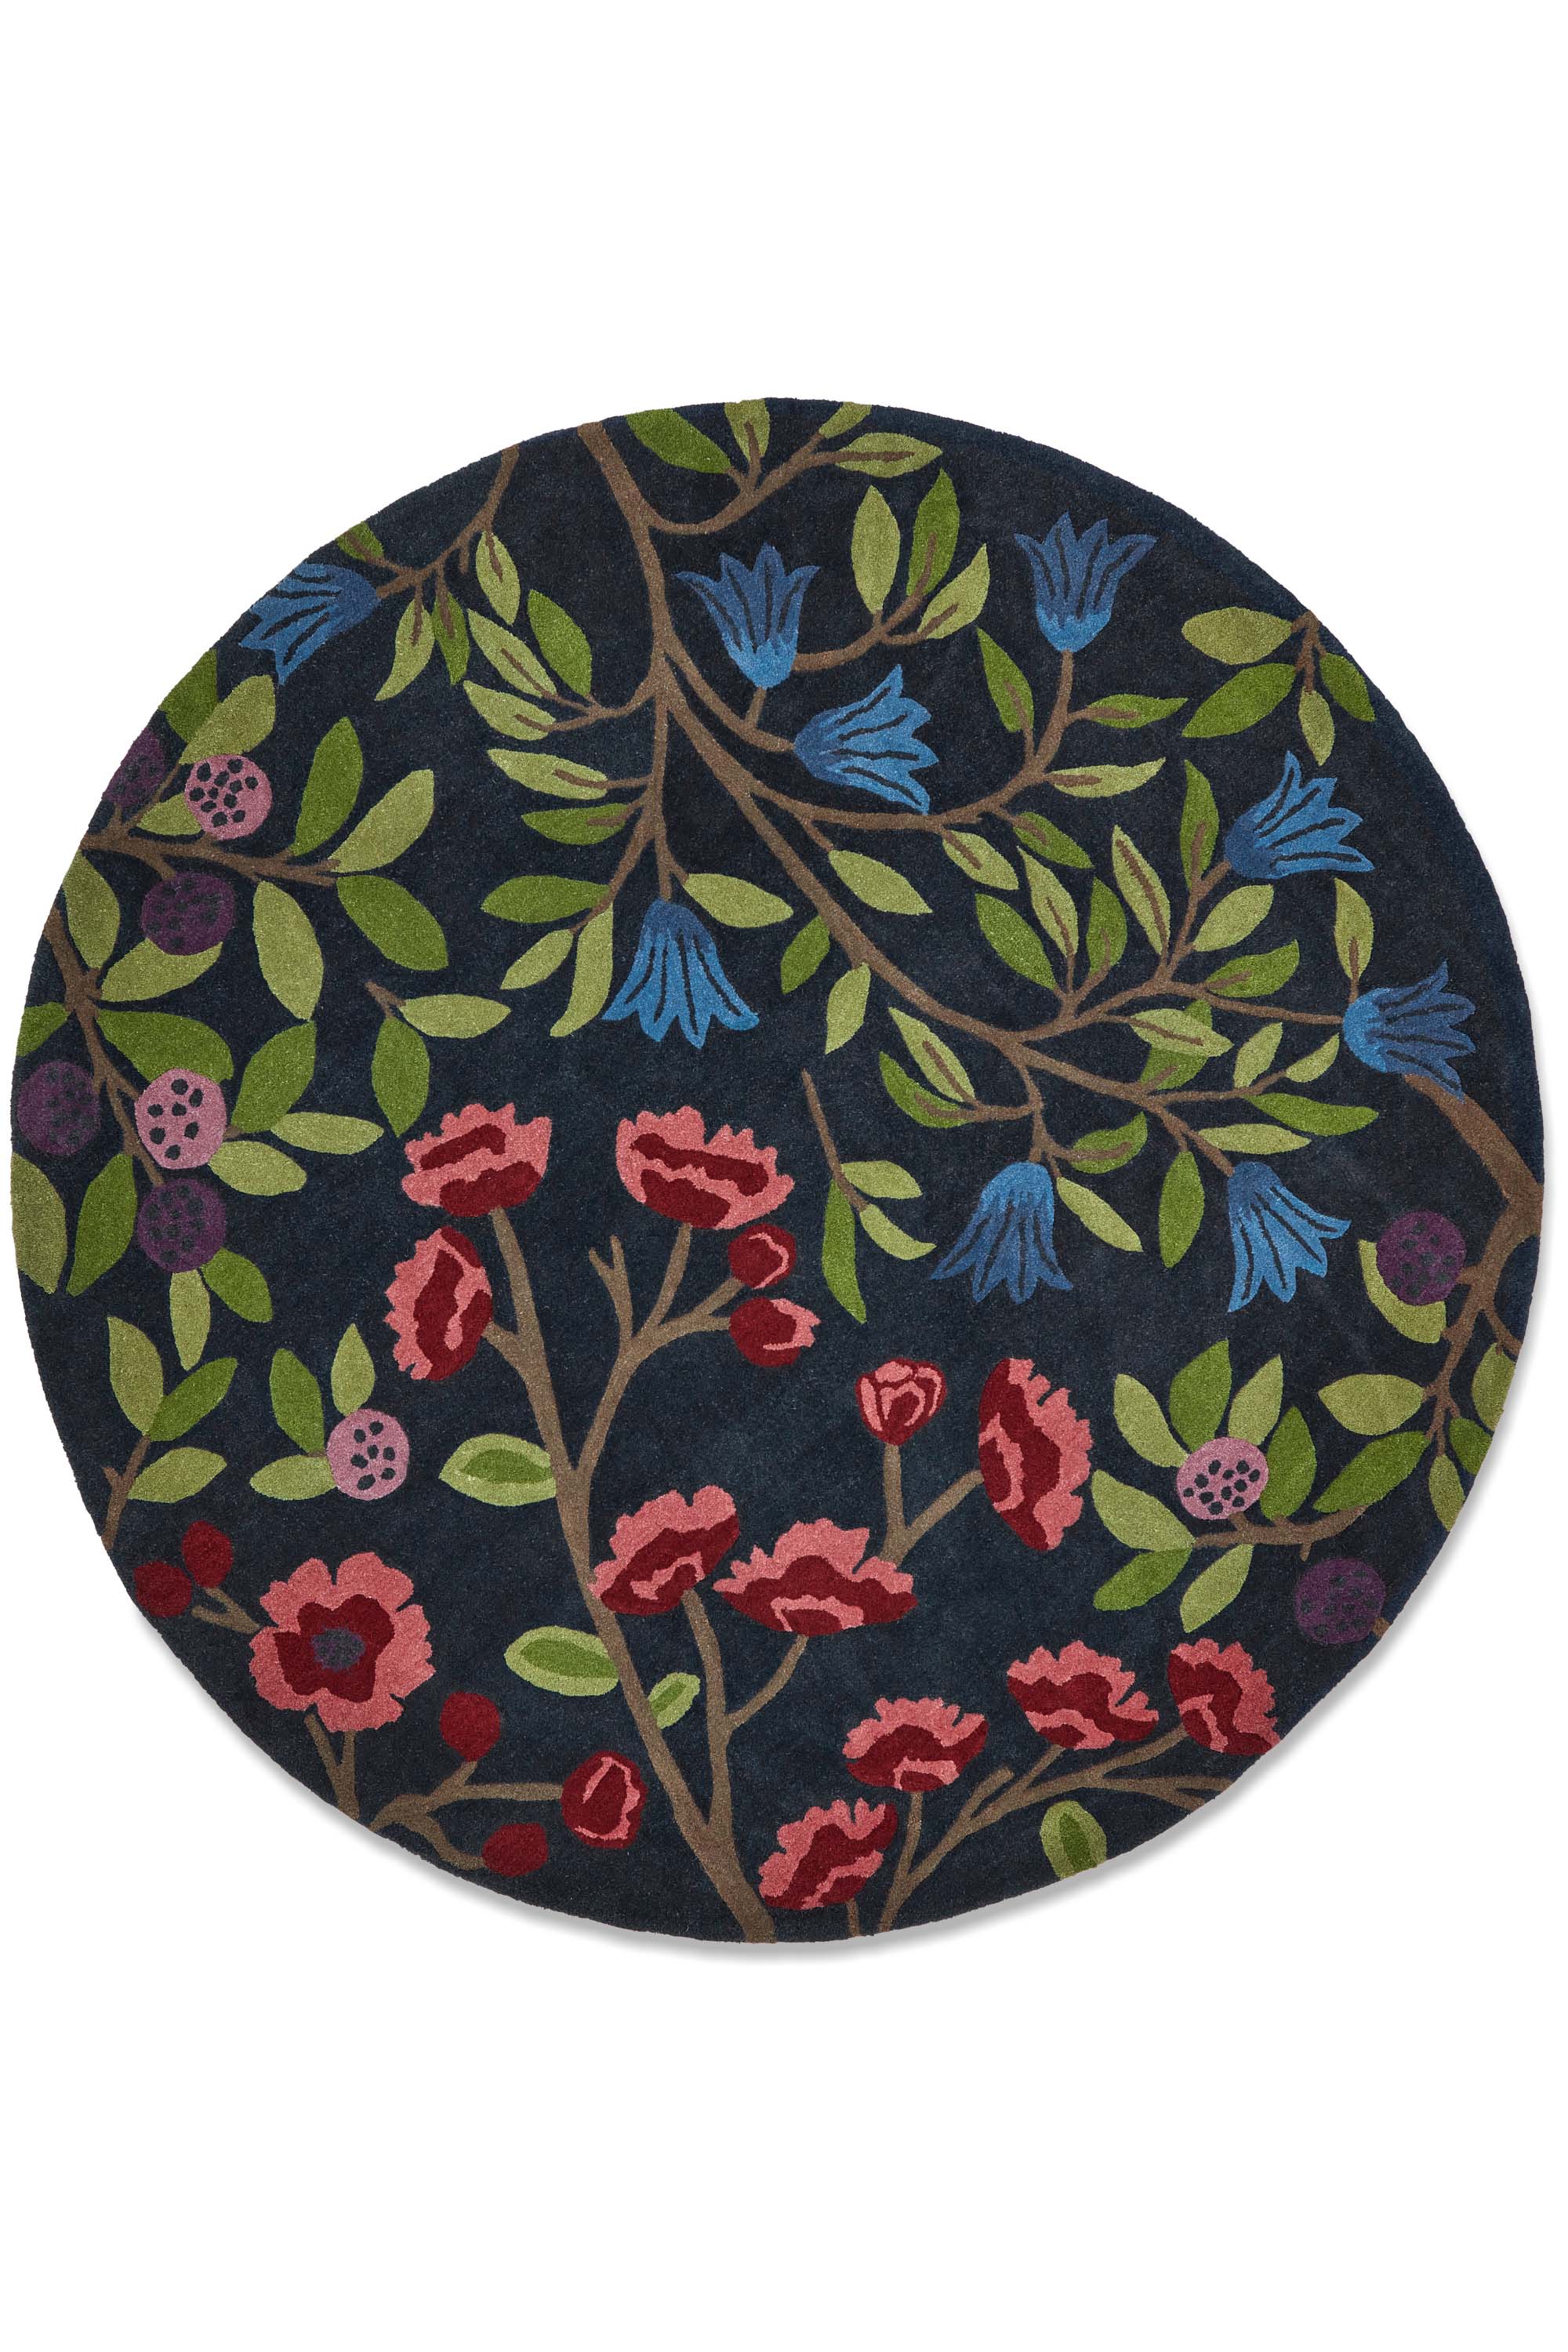 Modern circle rug with floral pattern in blue and natural tones